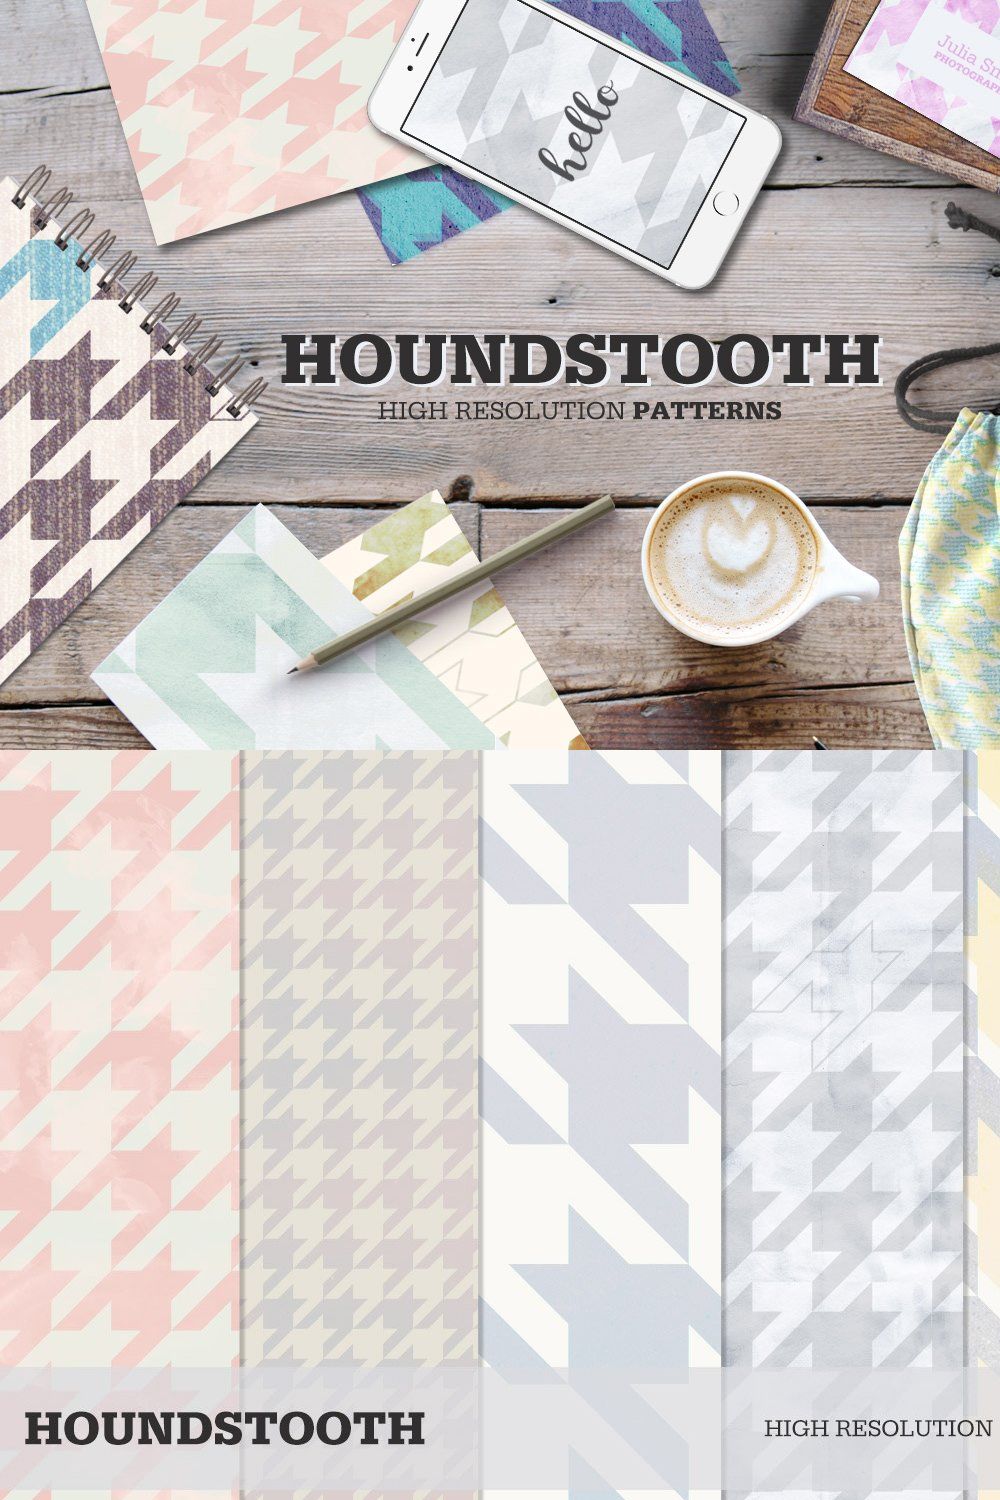 Houndstooth patterns pinterest preview image.